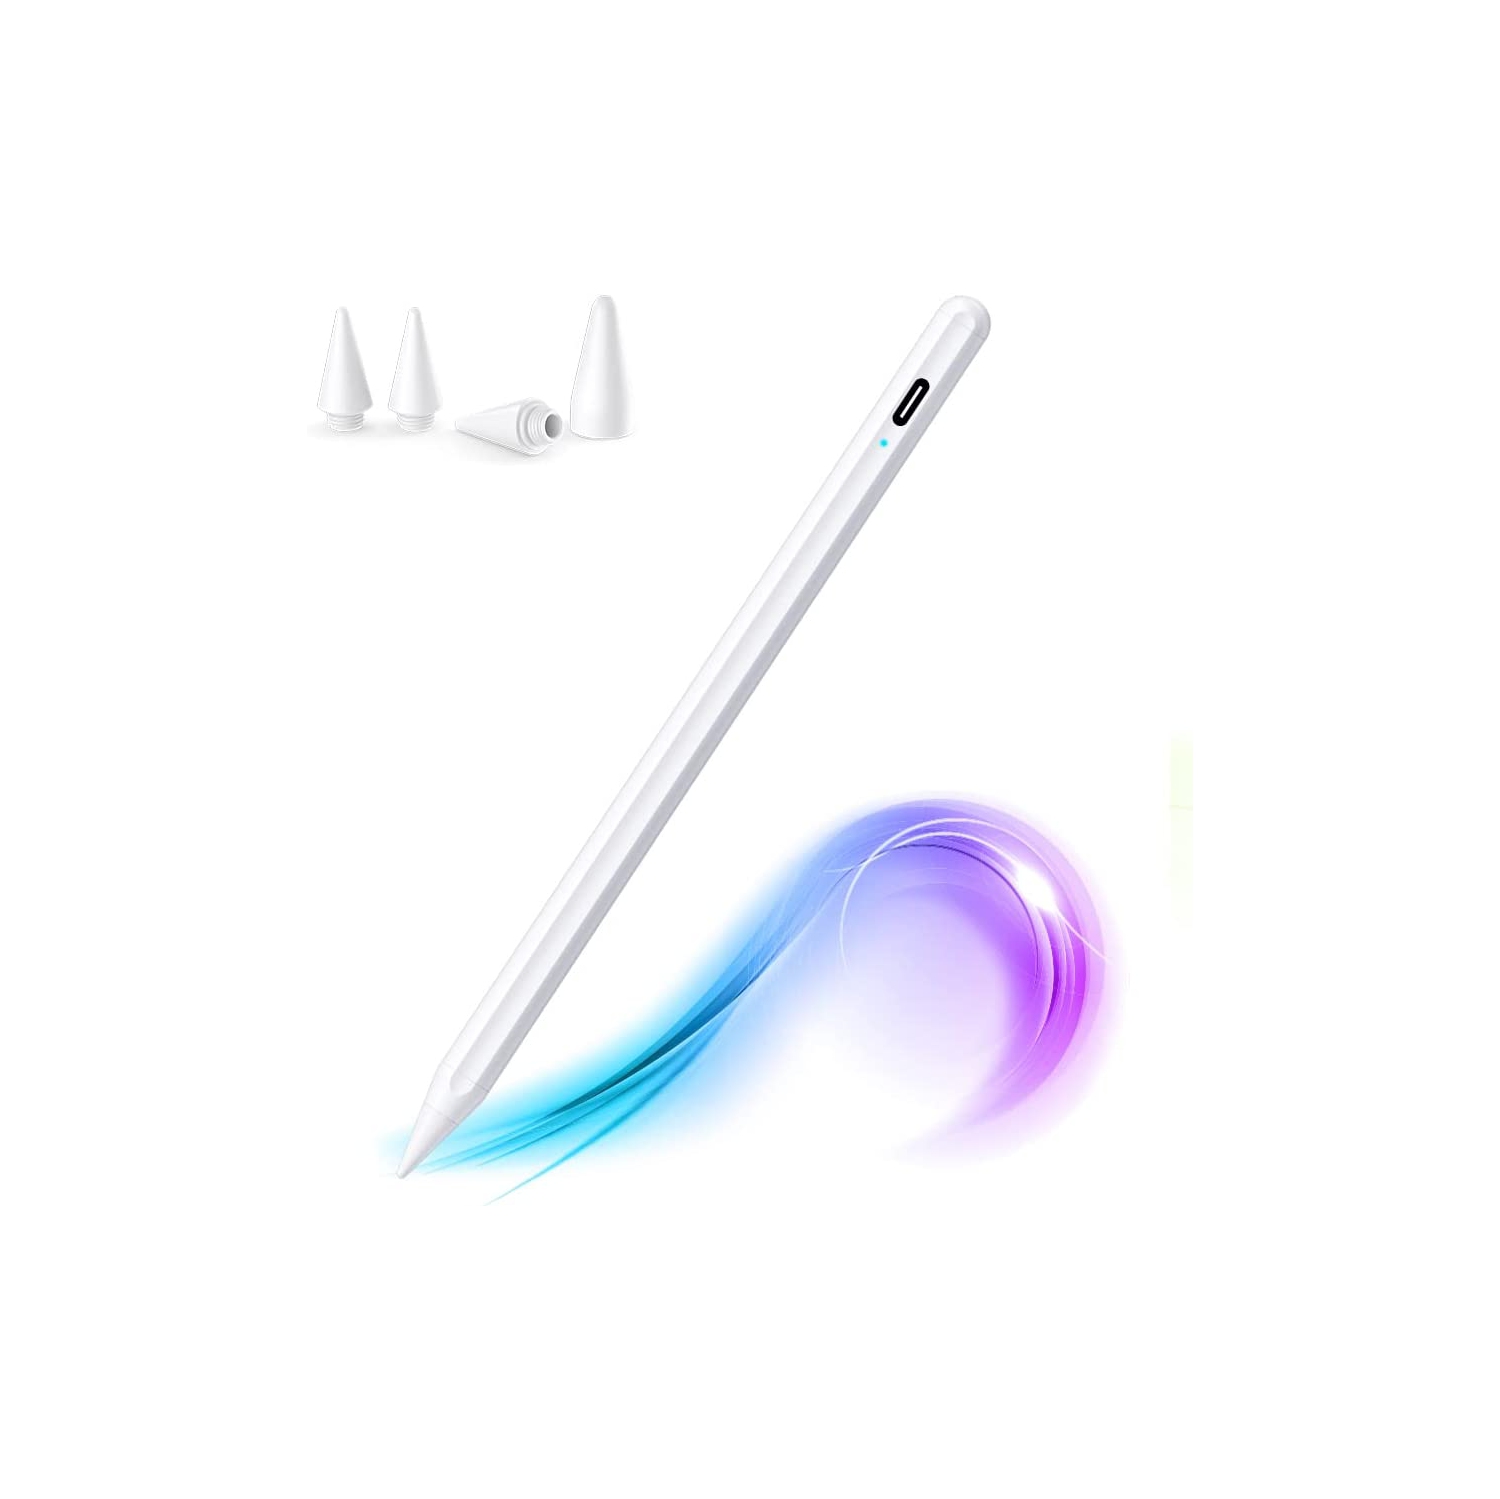 M Stylus Pen with Palm Rejection, Tilt & Magnetic for Apple iPad 2018-2022, Smooth Fine Tip, High Precision Active iPad Pencil for iPad 6/7/8/9/10, iPad Air 3/4/5, iPad Mini 5/6,